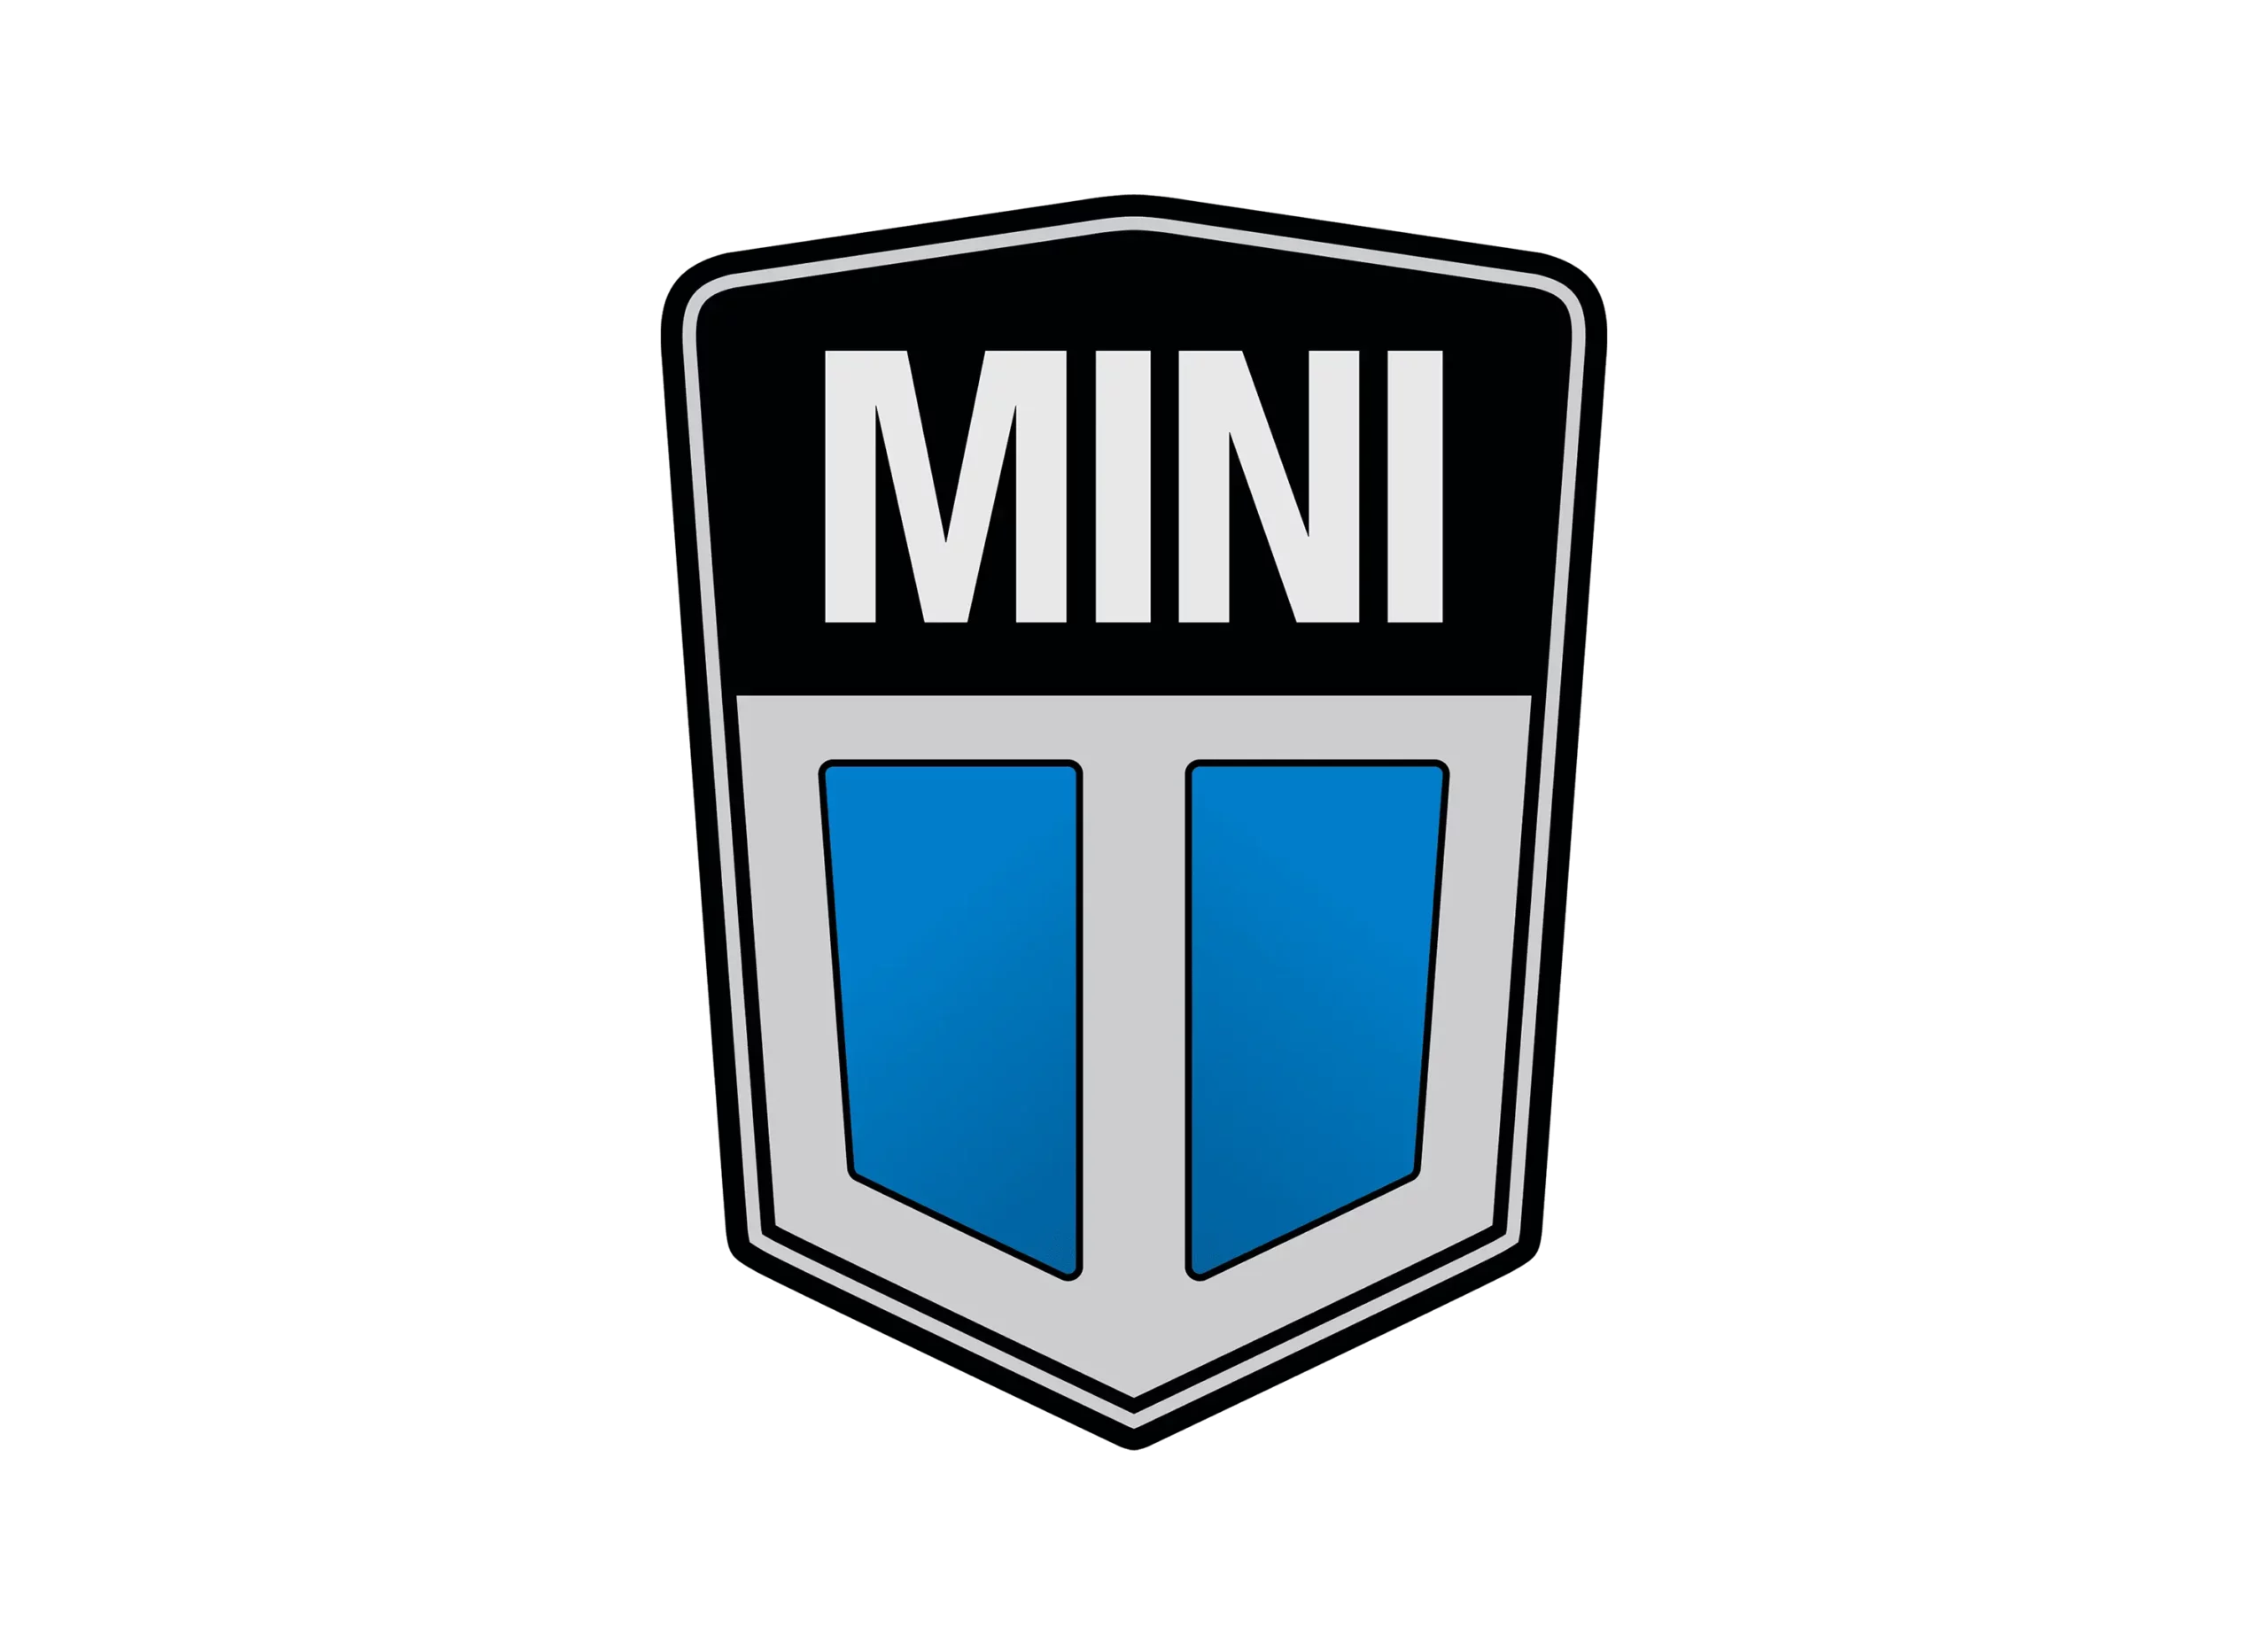 Mini Logo and symbol, meaning, history, WebP, brand